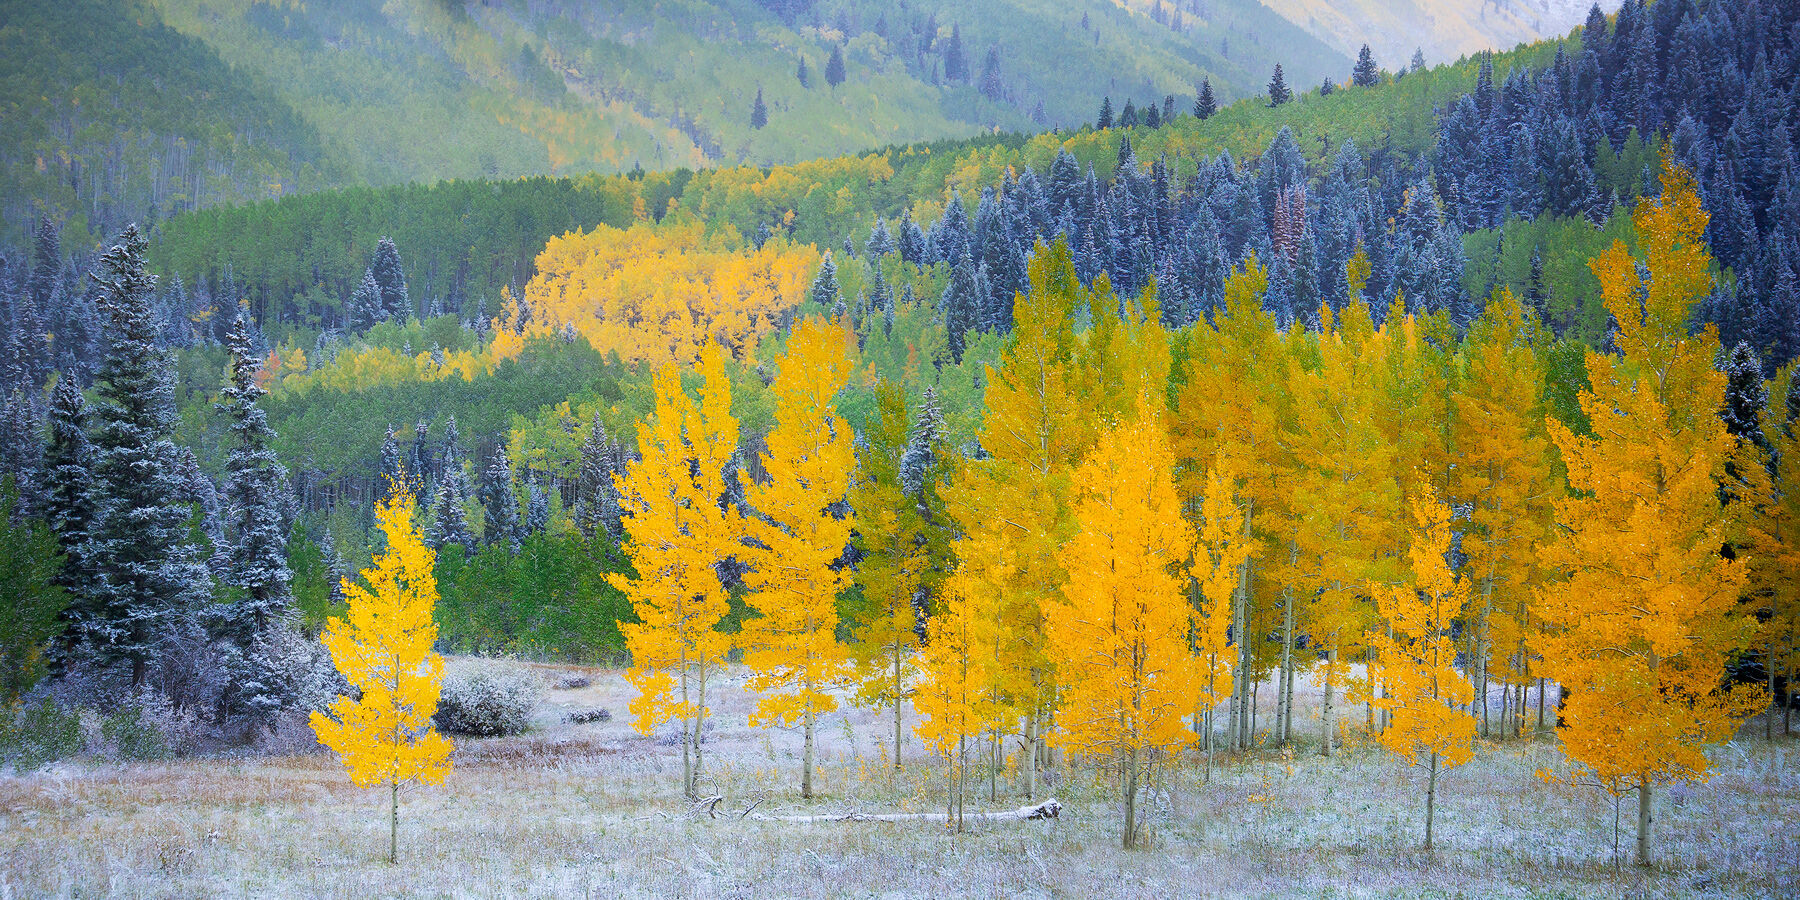 A very light dusting of snow covers the ground and the spruce trees while aspen trees of yellow and green are spread across the hillside scene.